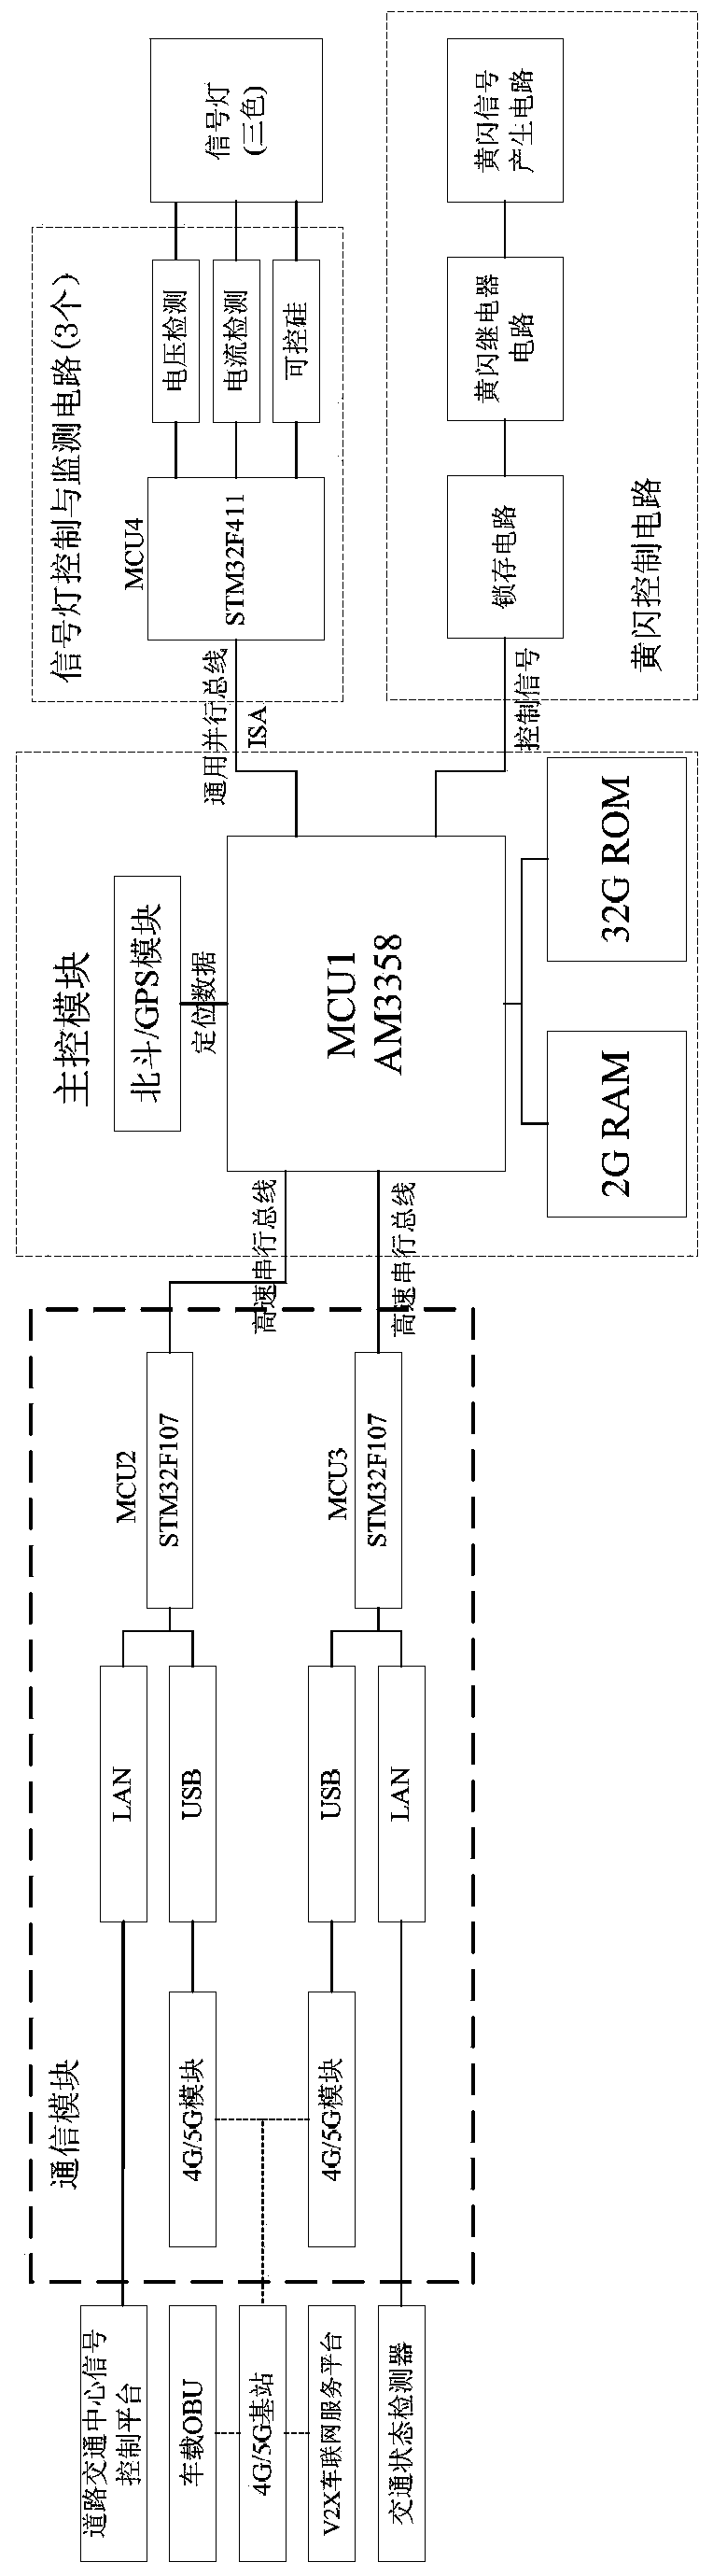 LTE-V2X-based internet of vehicle road traffic signal control system